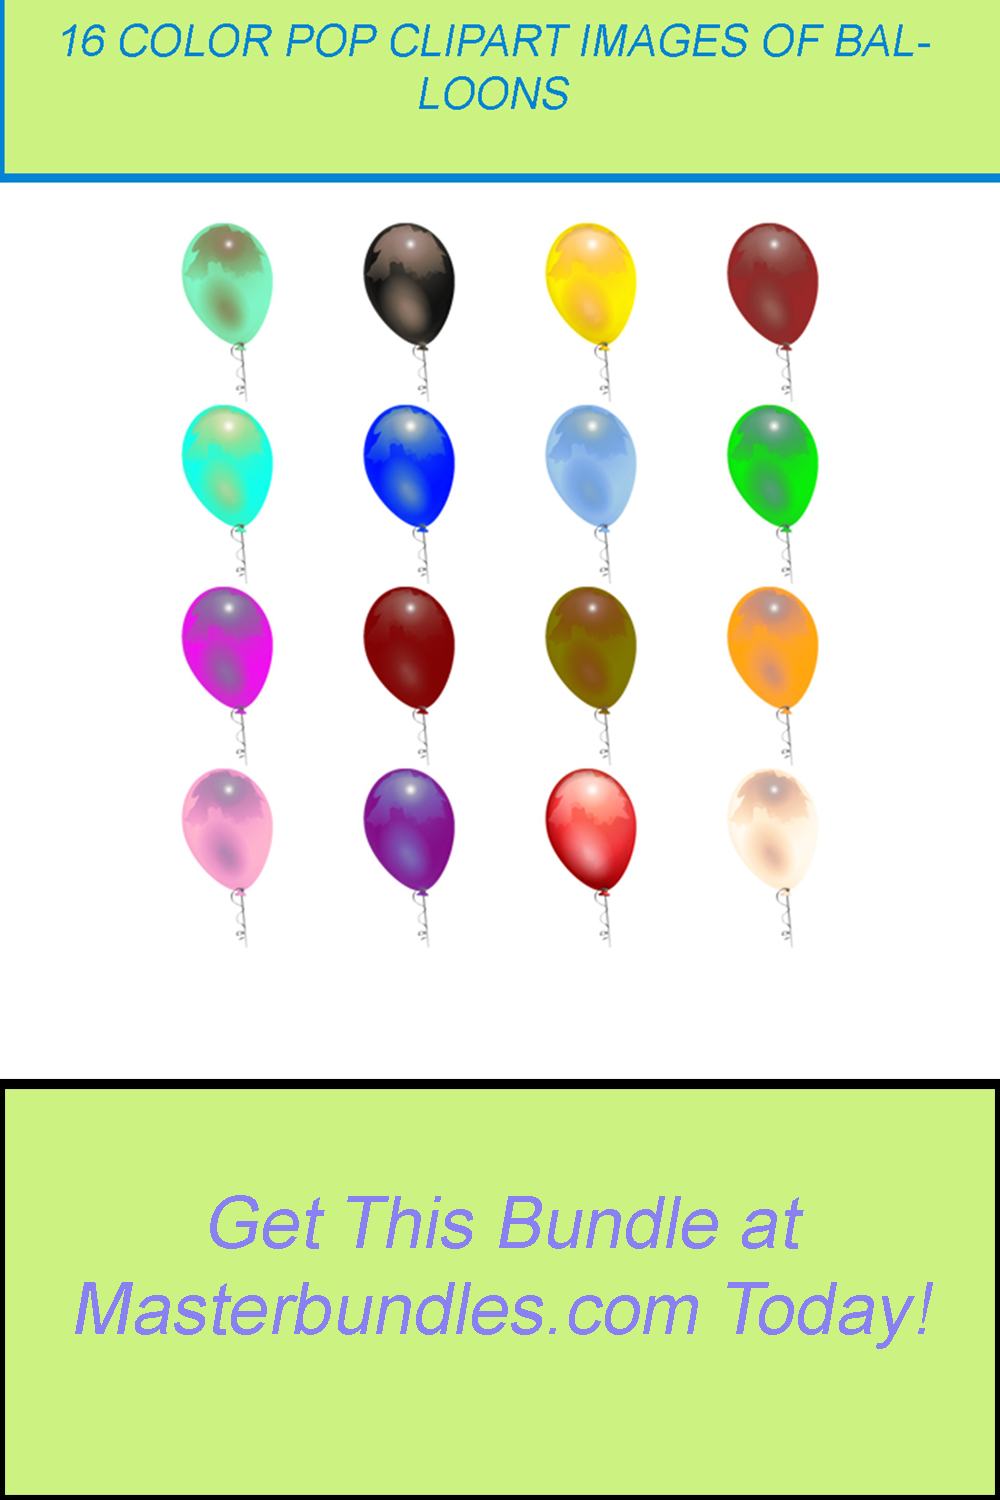 16 COLOR POP CLIPART IMAGES OF BALLOONS pinterest preview image.